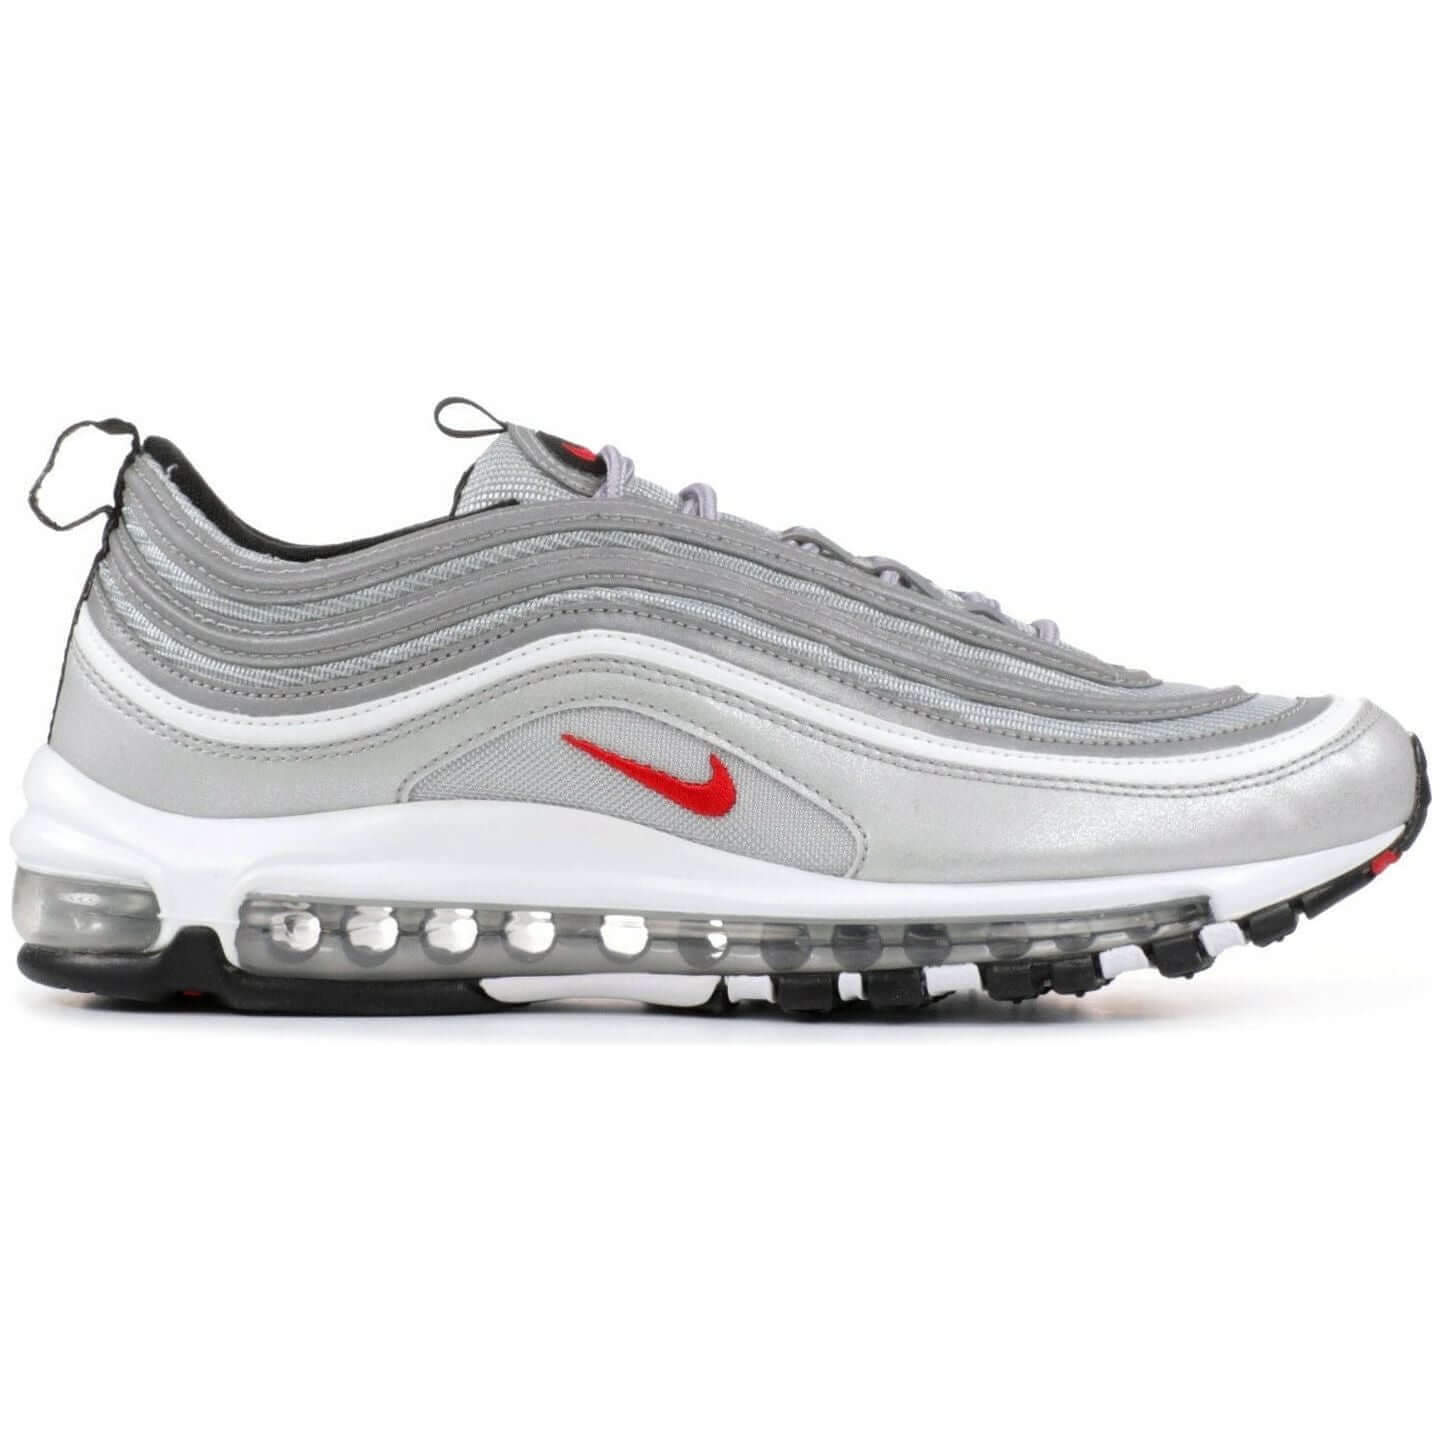 Air Max 97 Silver Bullet from Nike